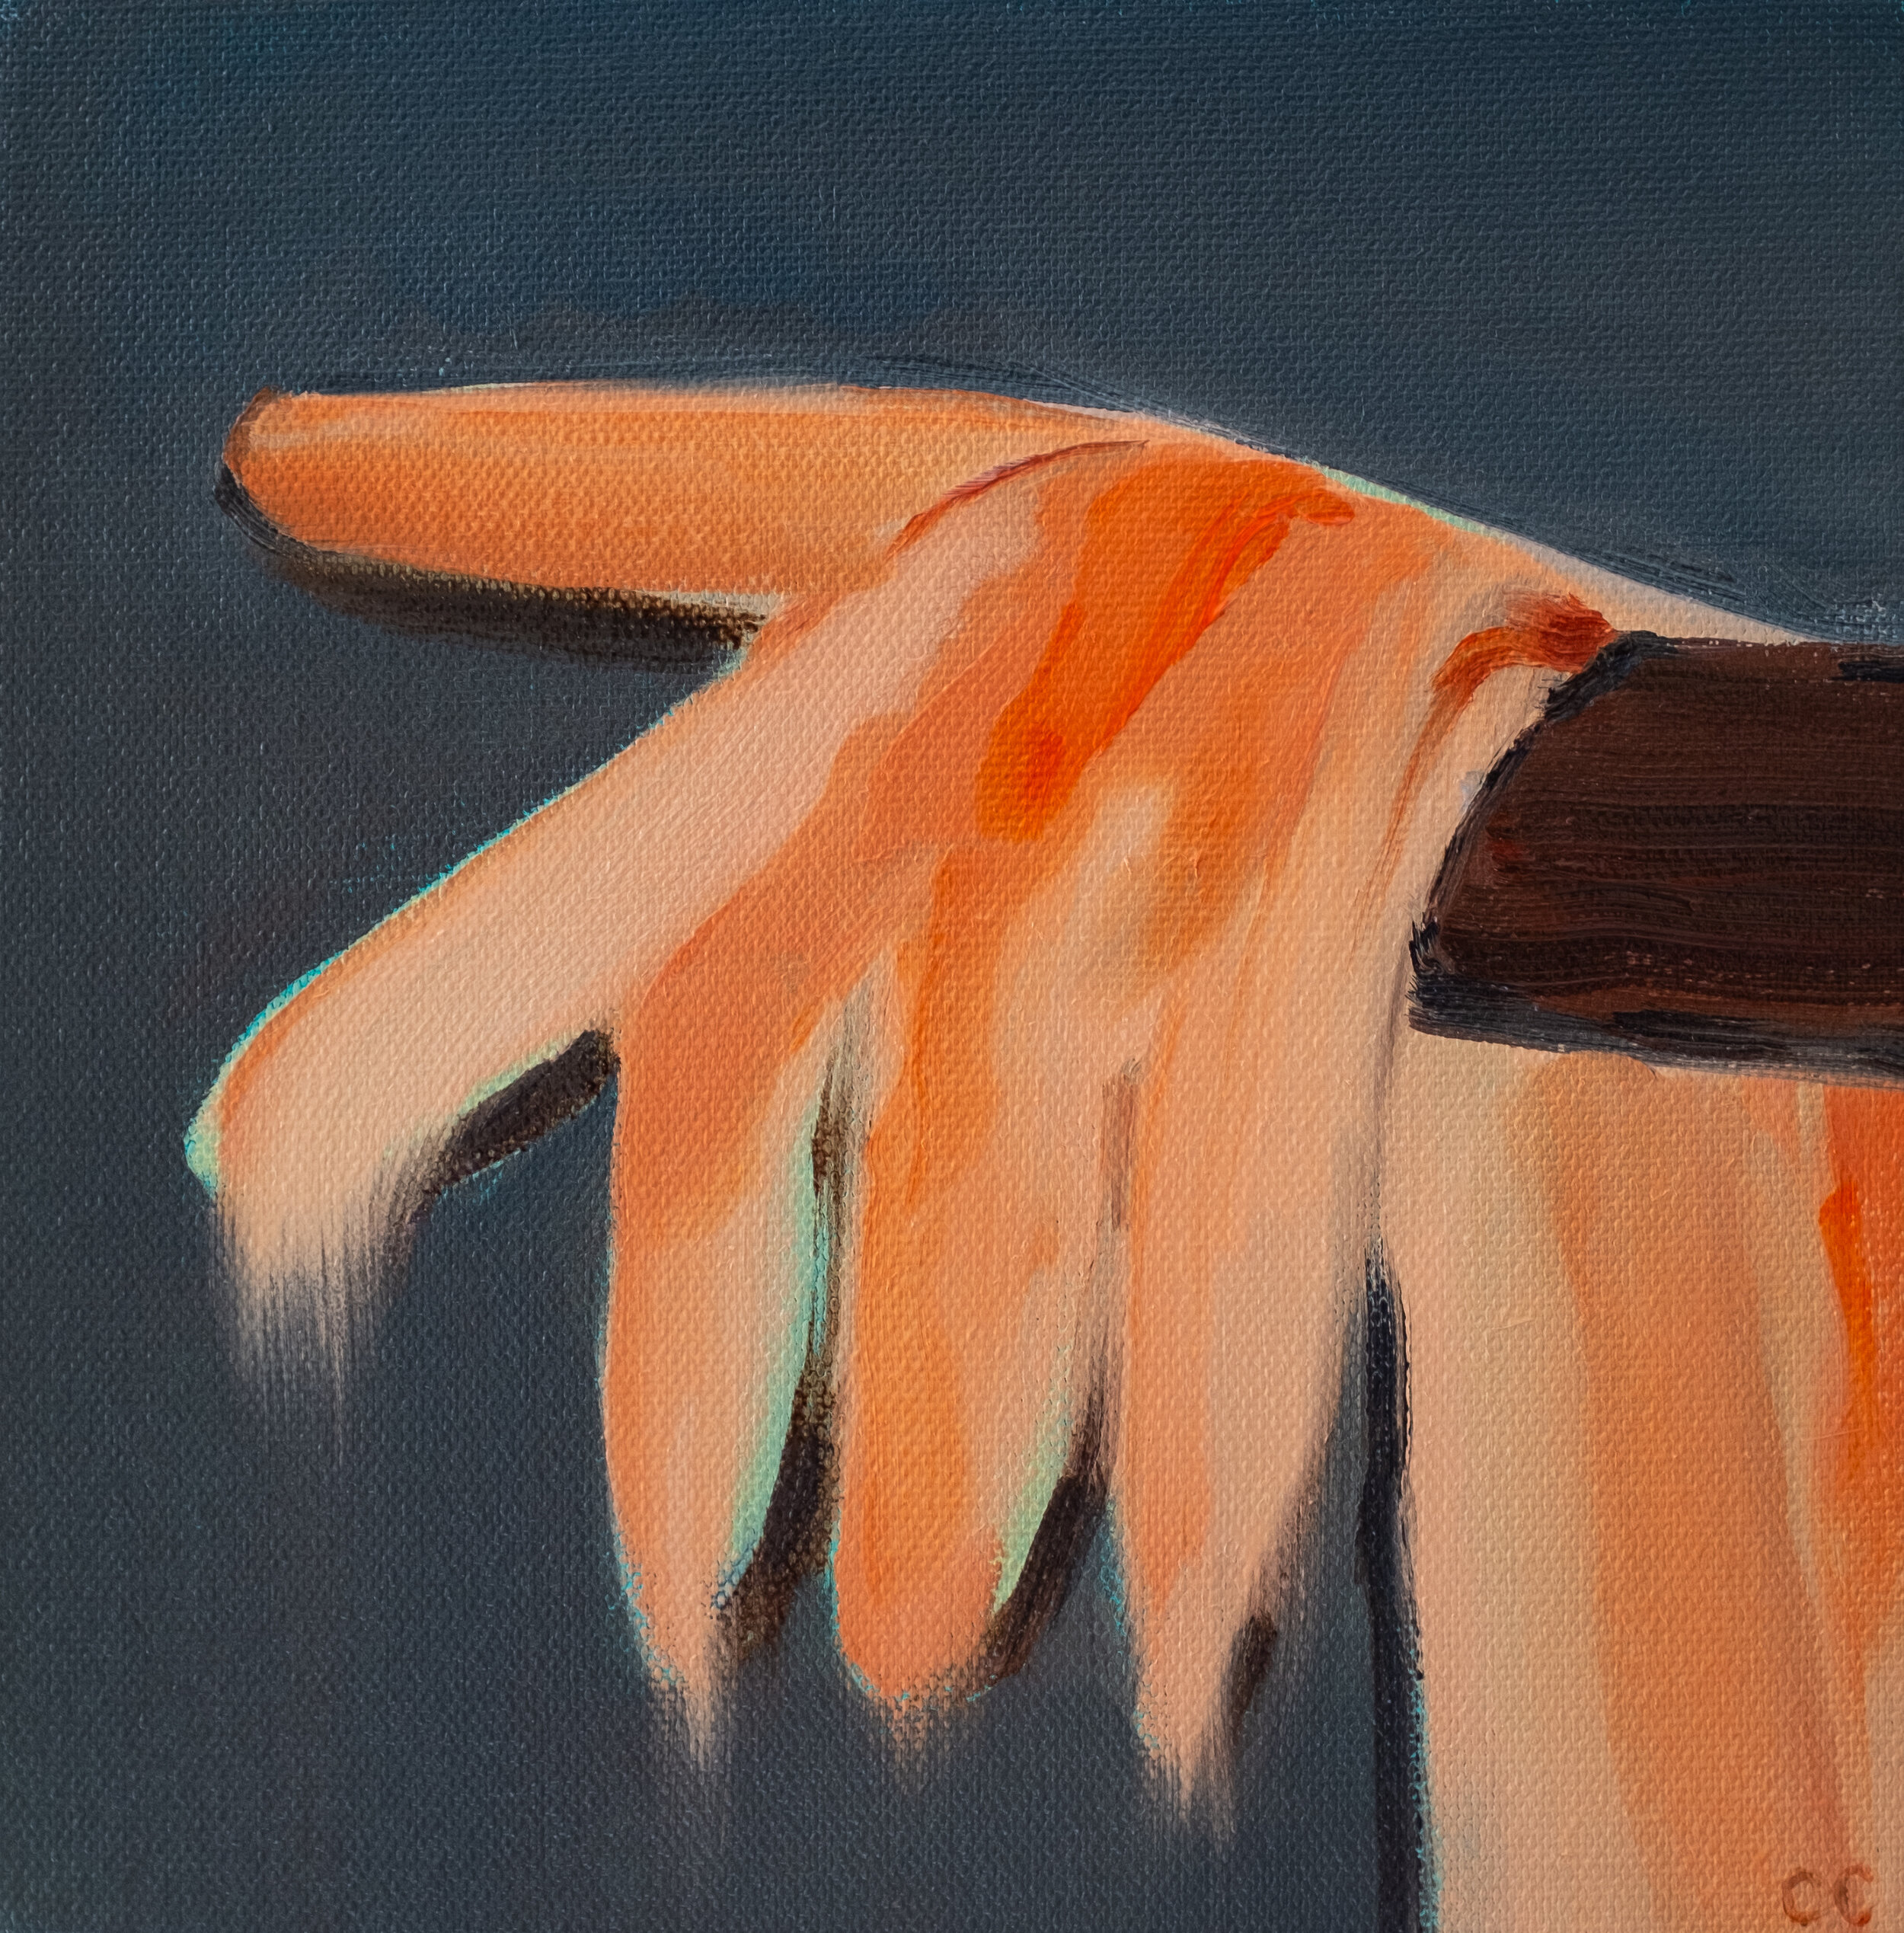  Cathleen Clarke,  The Glove , 2021. Oil and acrylic on canvas, 8 x 8 inches. ©Cathleen Clarke, courtesy of Fou Gallery 